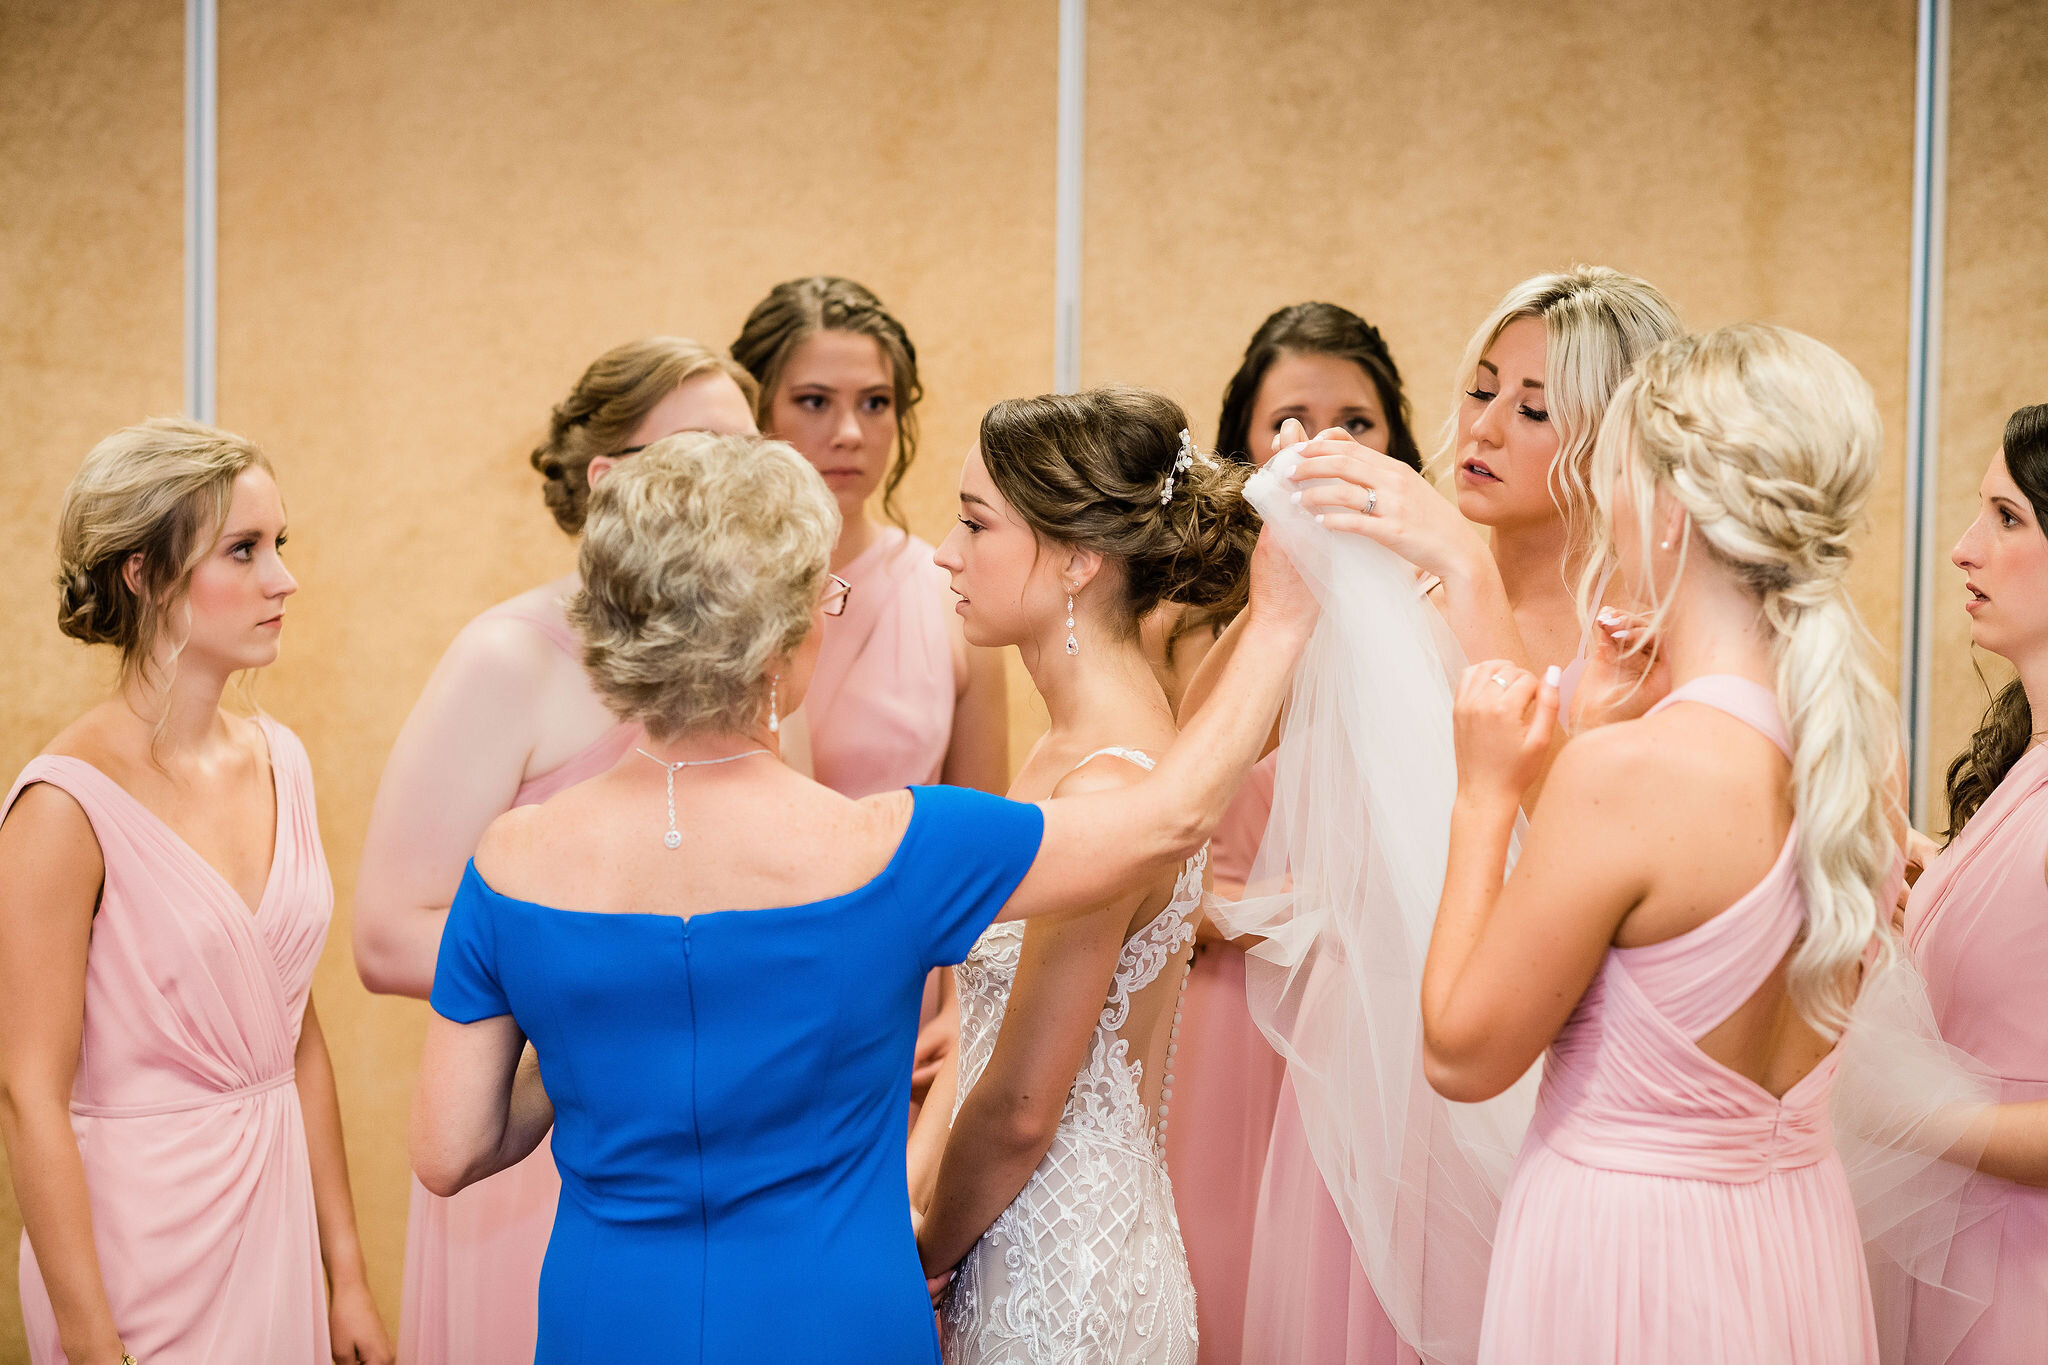 Mother of the bride and bridesmaids putting the bride's veil on